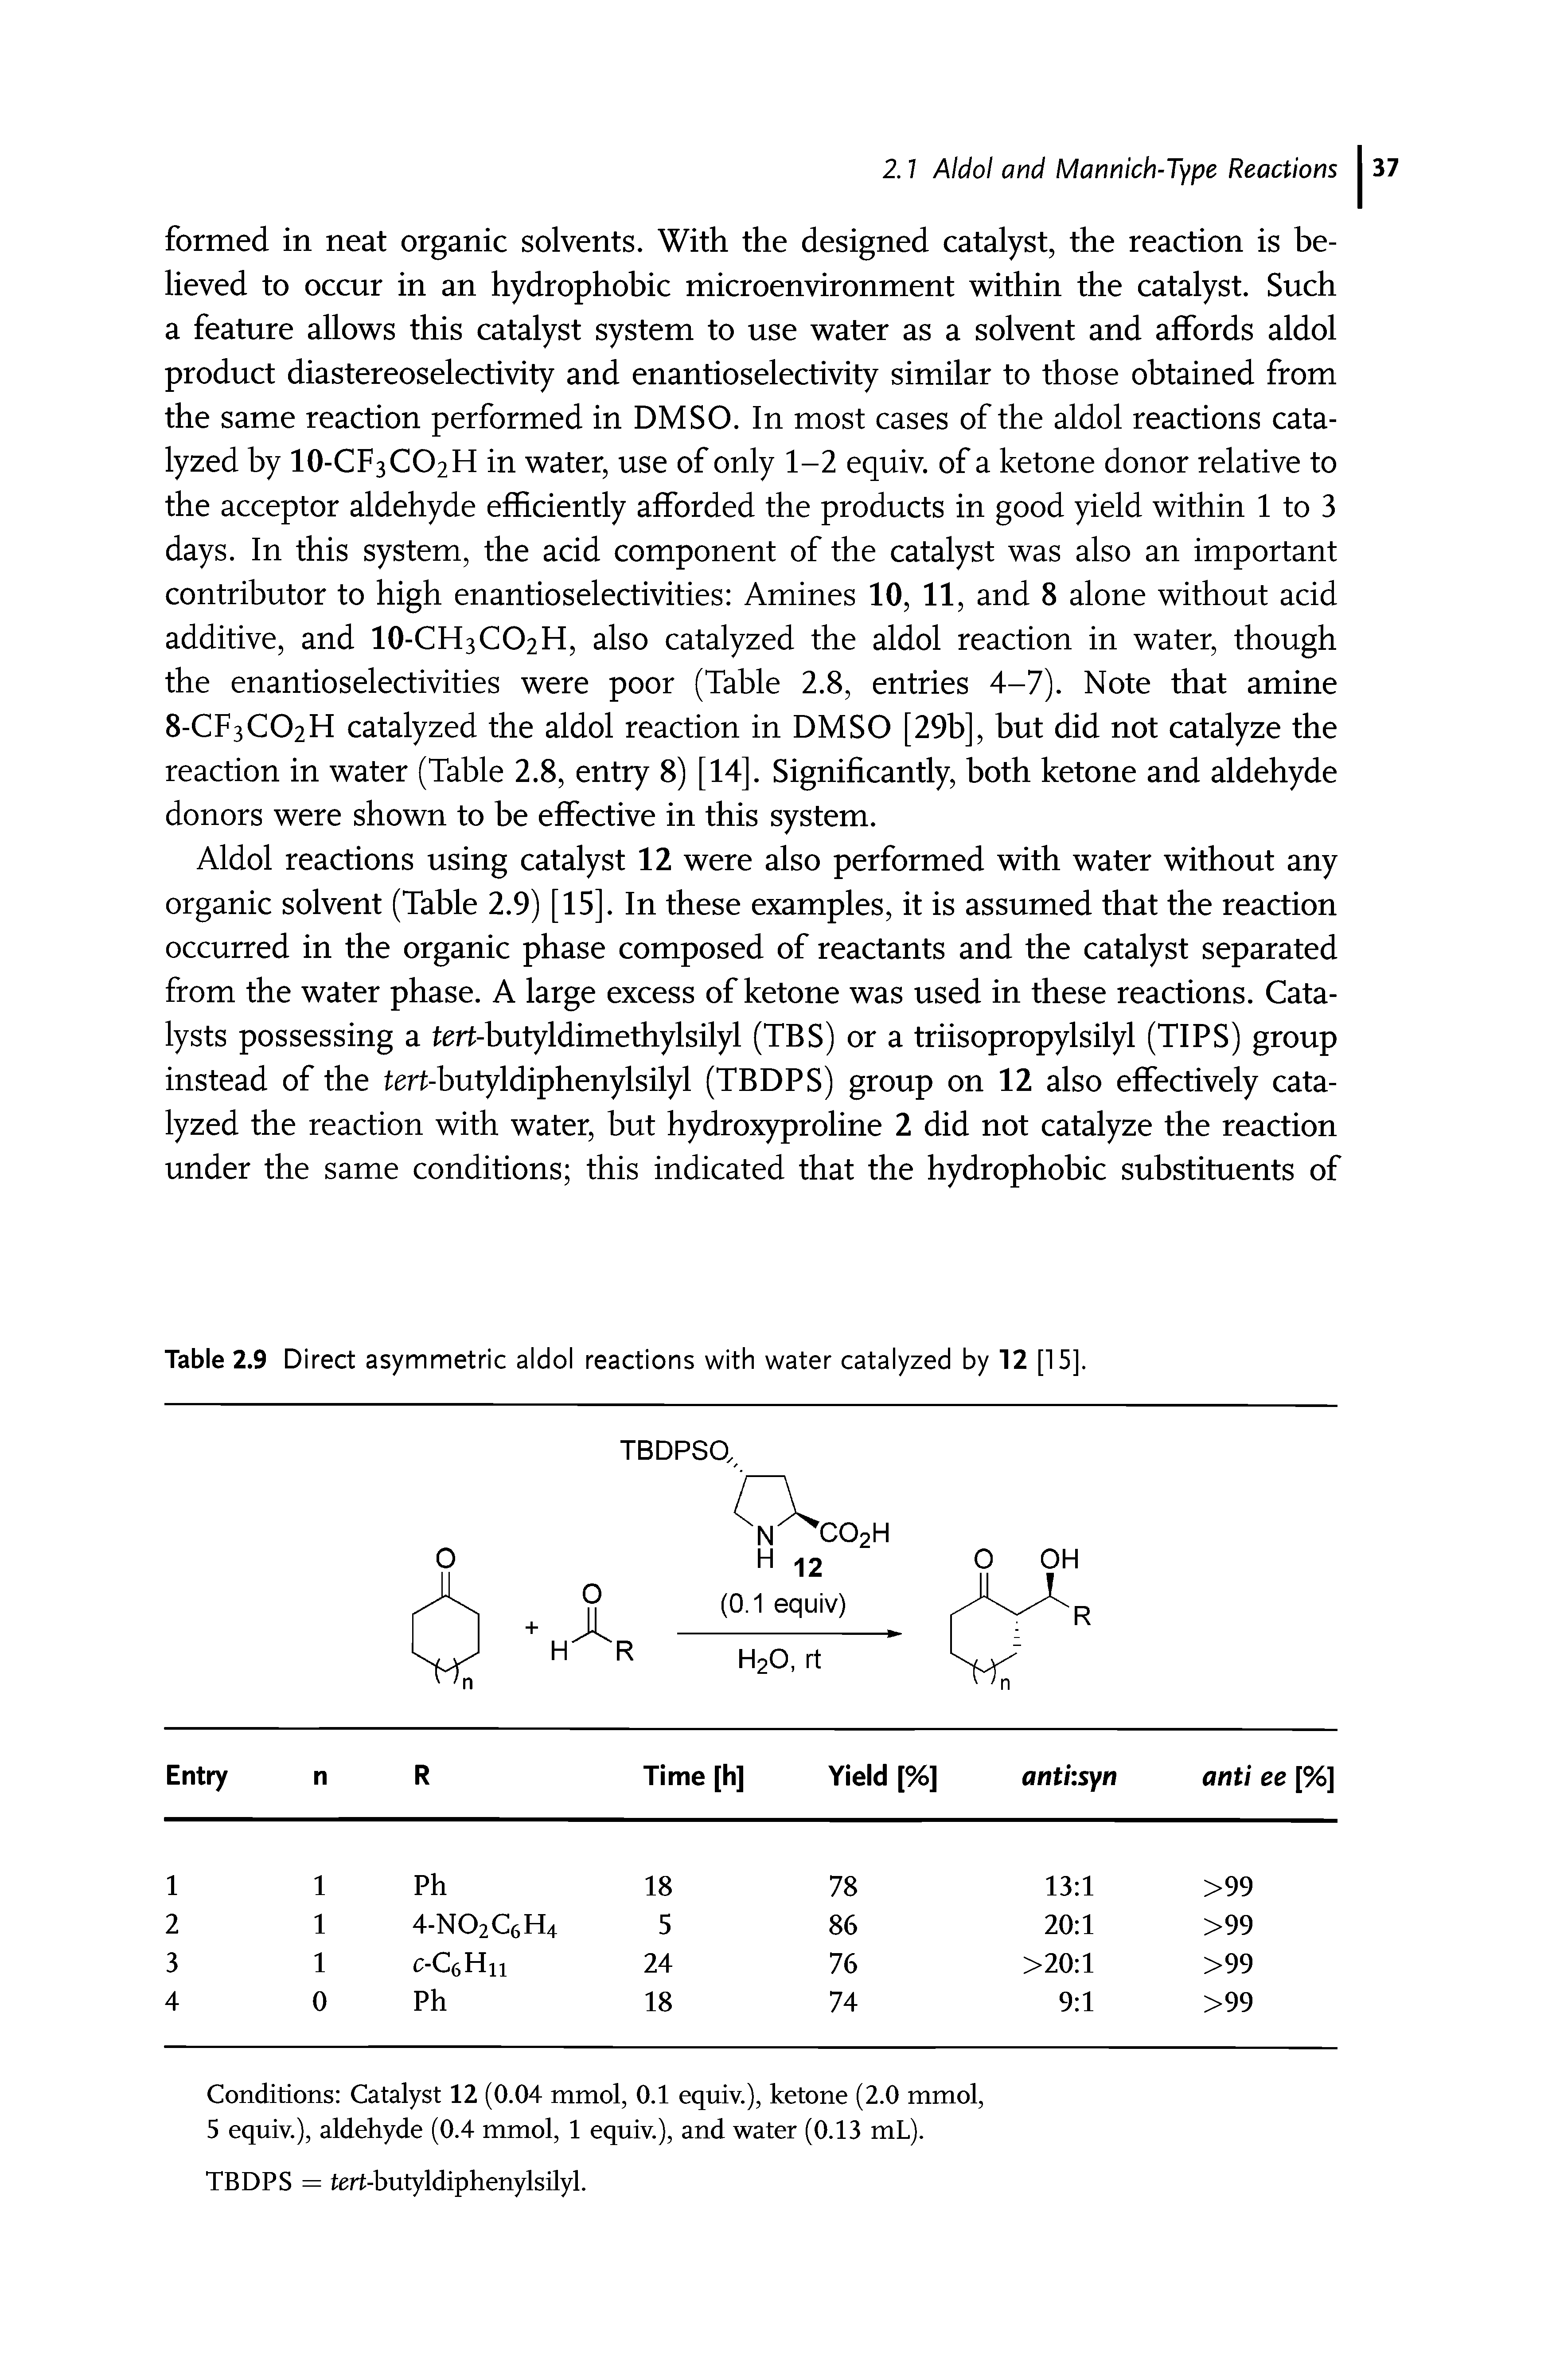 Table 2.9 Direct asymmetric aldol reactions with water catalyzed by 12 [15].